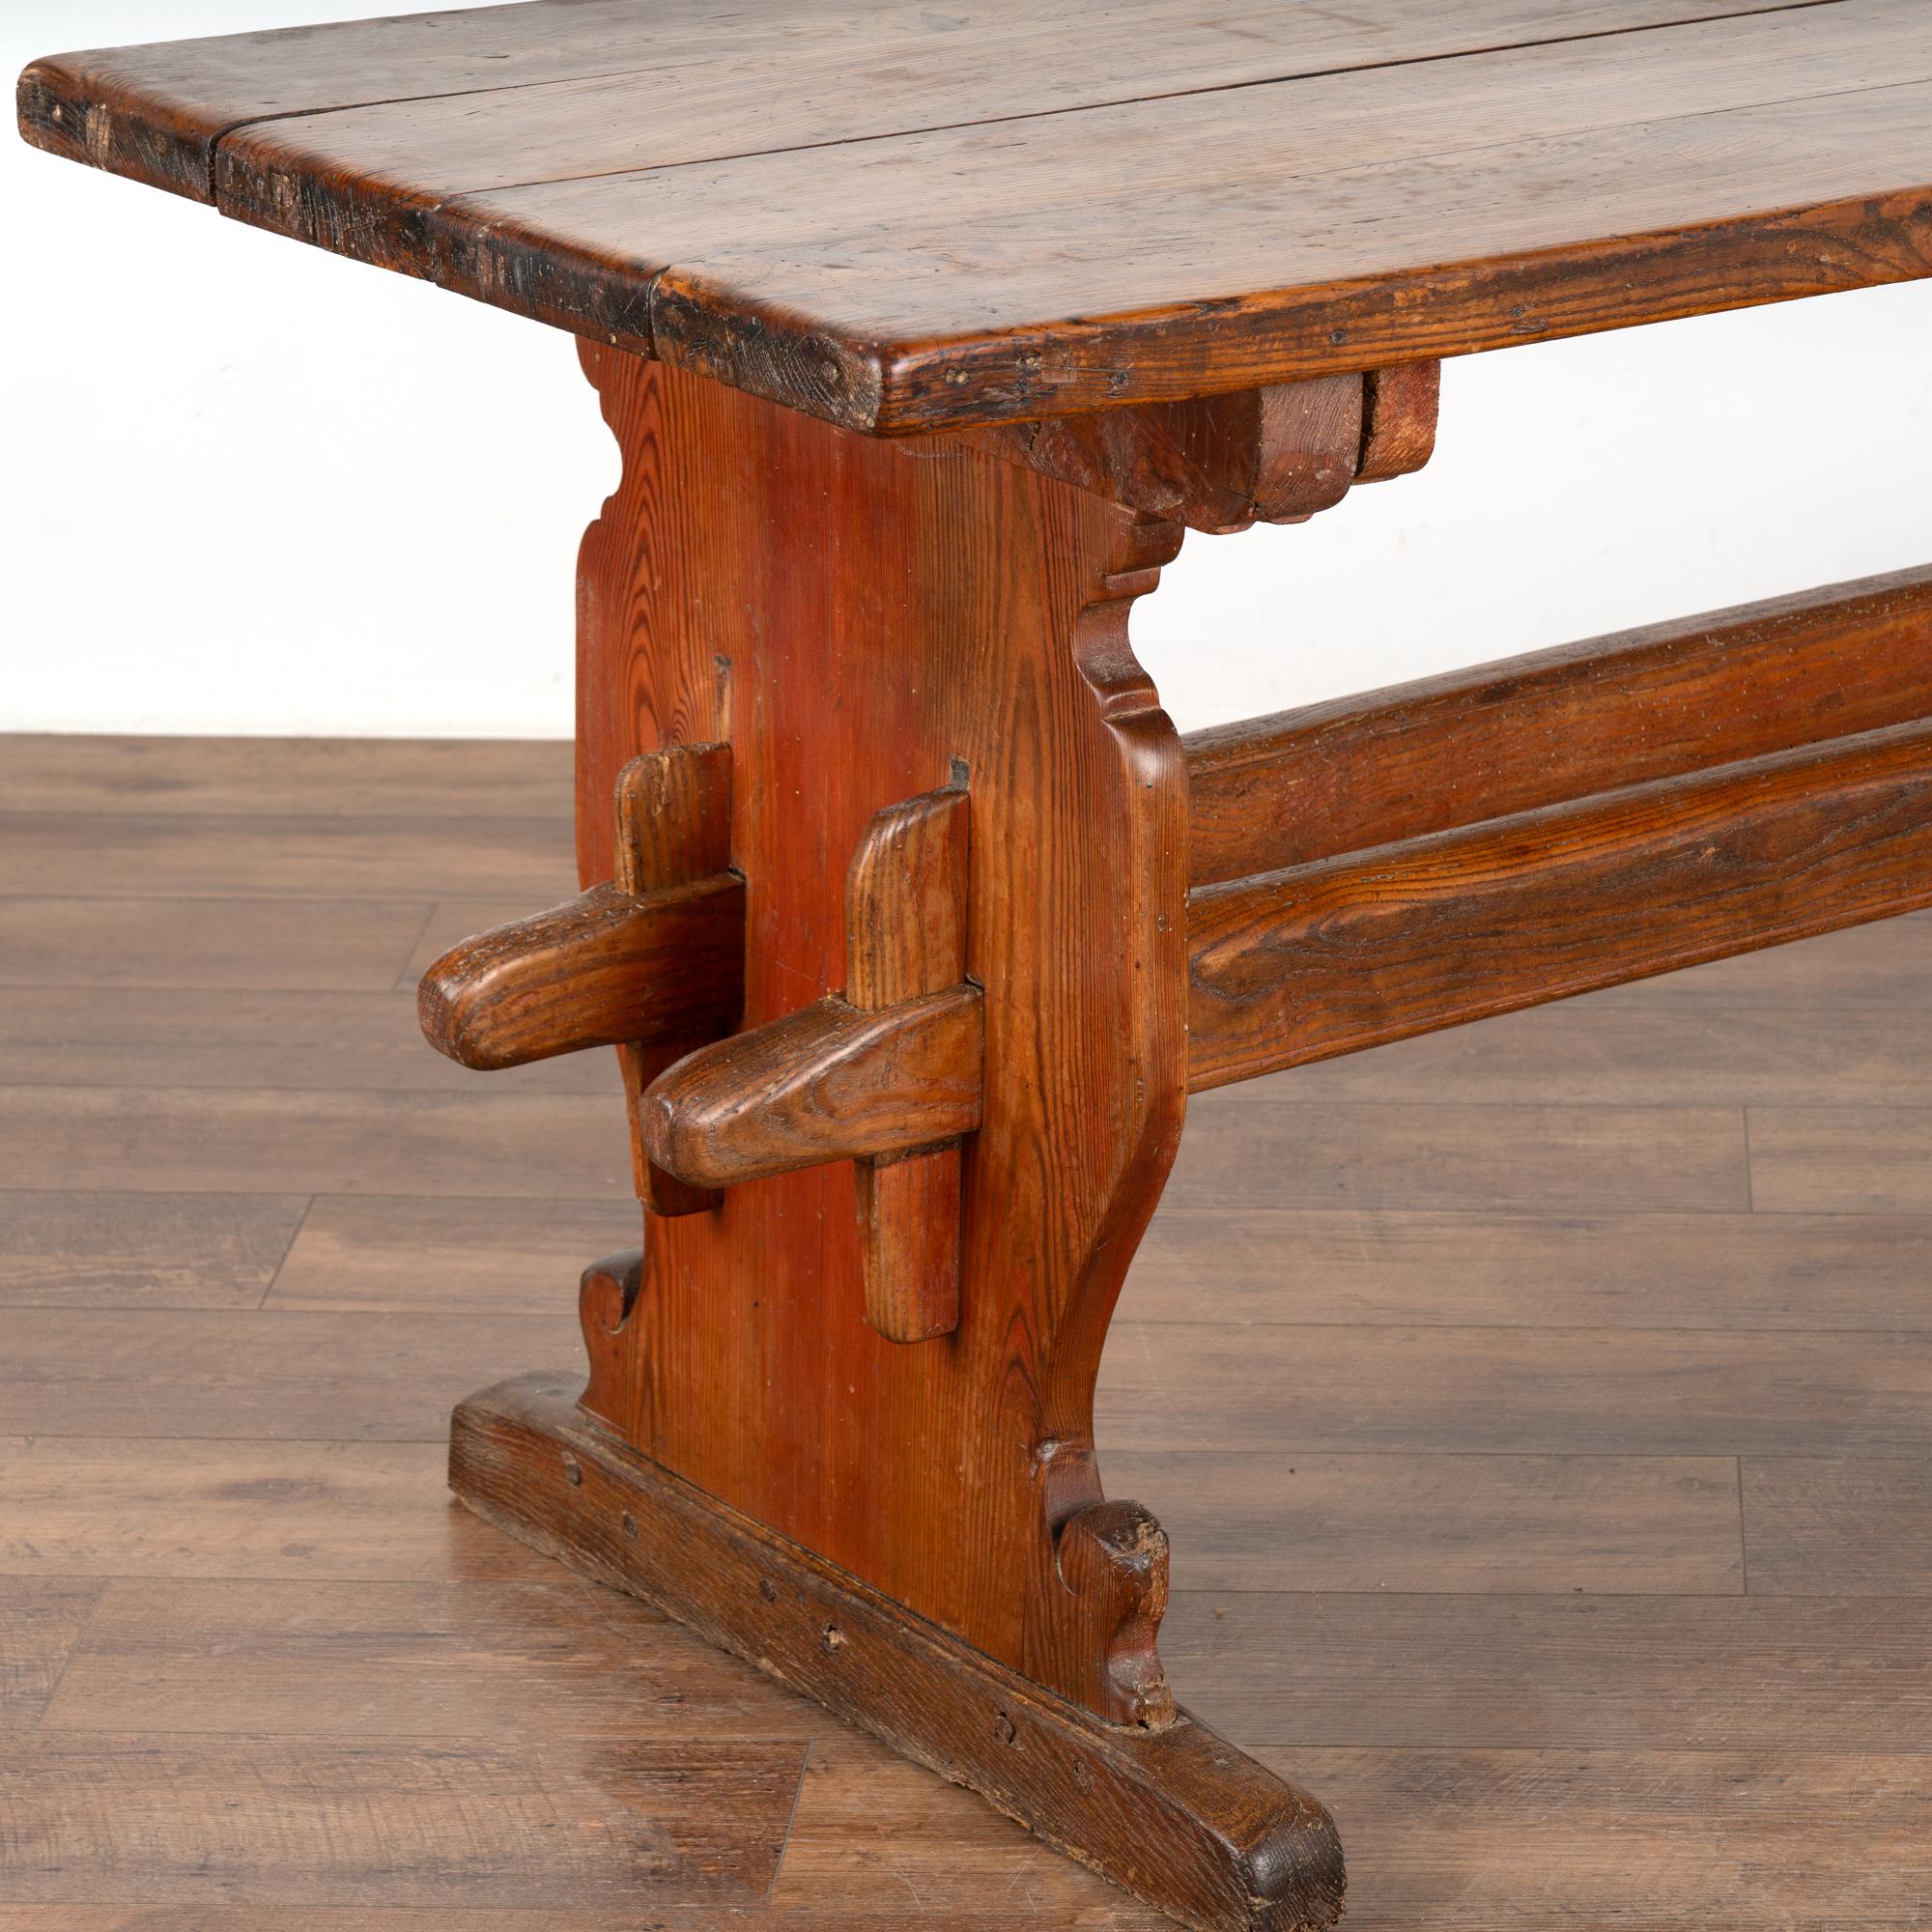 Farm Dining Kitchen Table With Trestle Base, Denmark circa 1820-40 In Good Condition For Sale In Round Top, TX